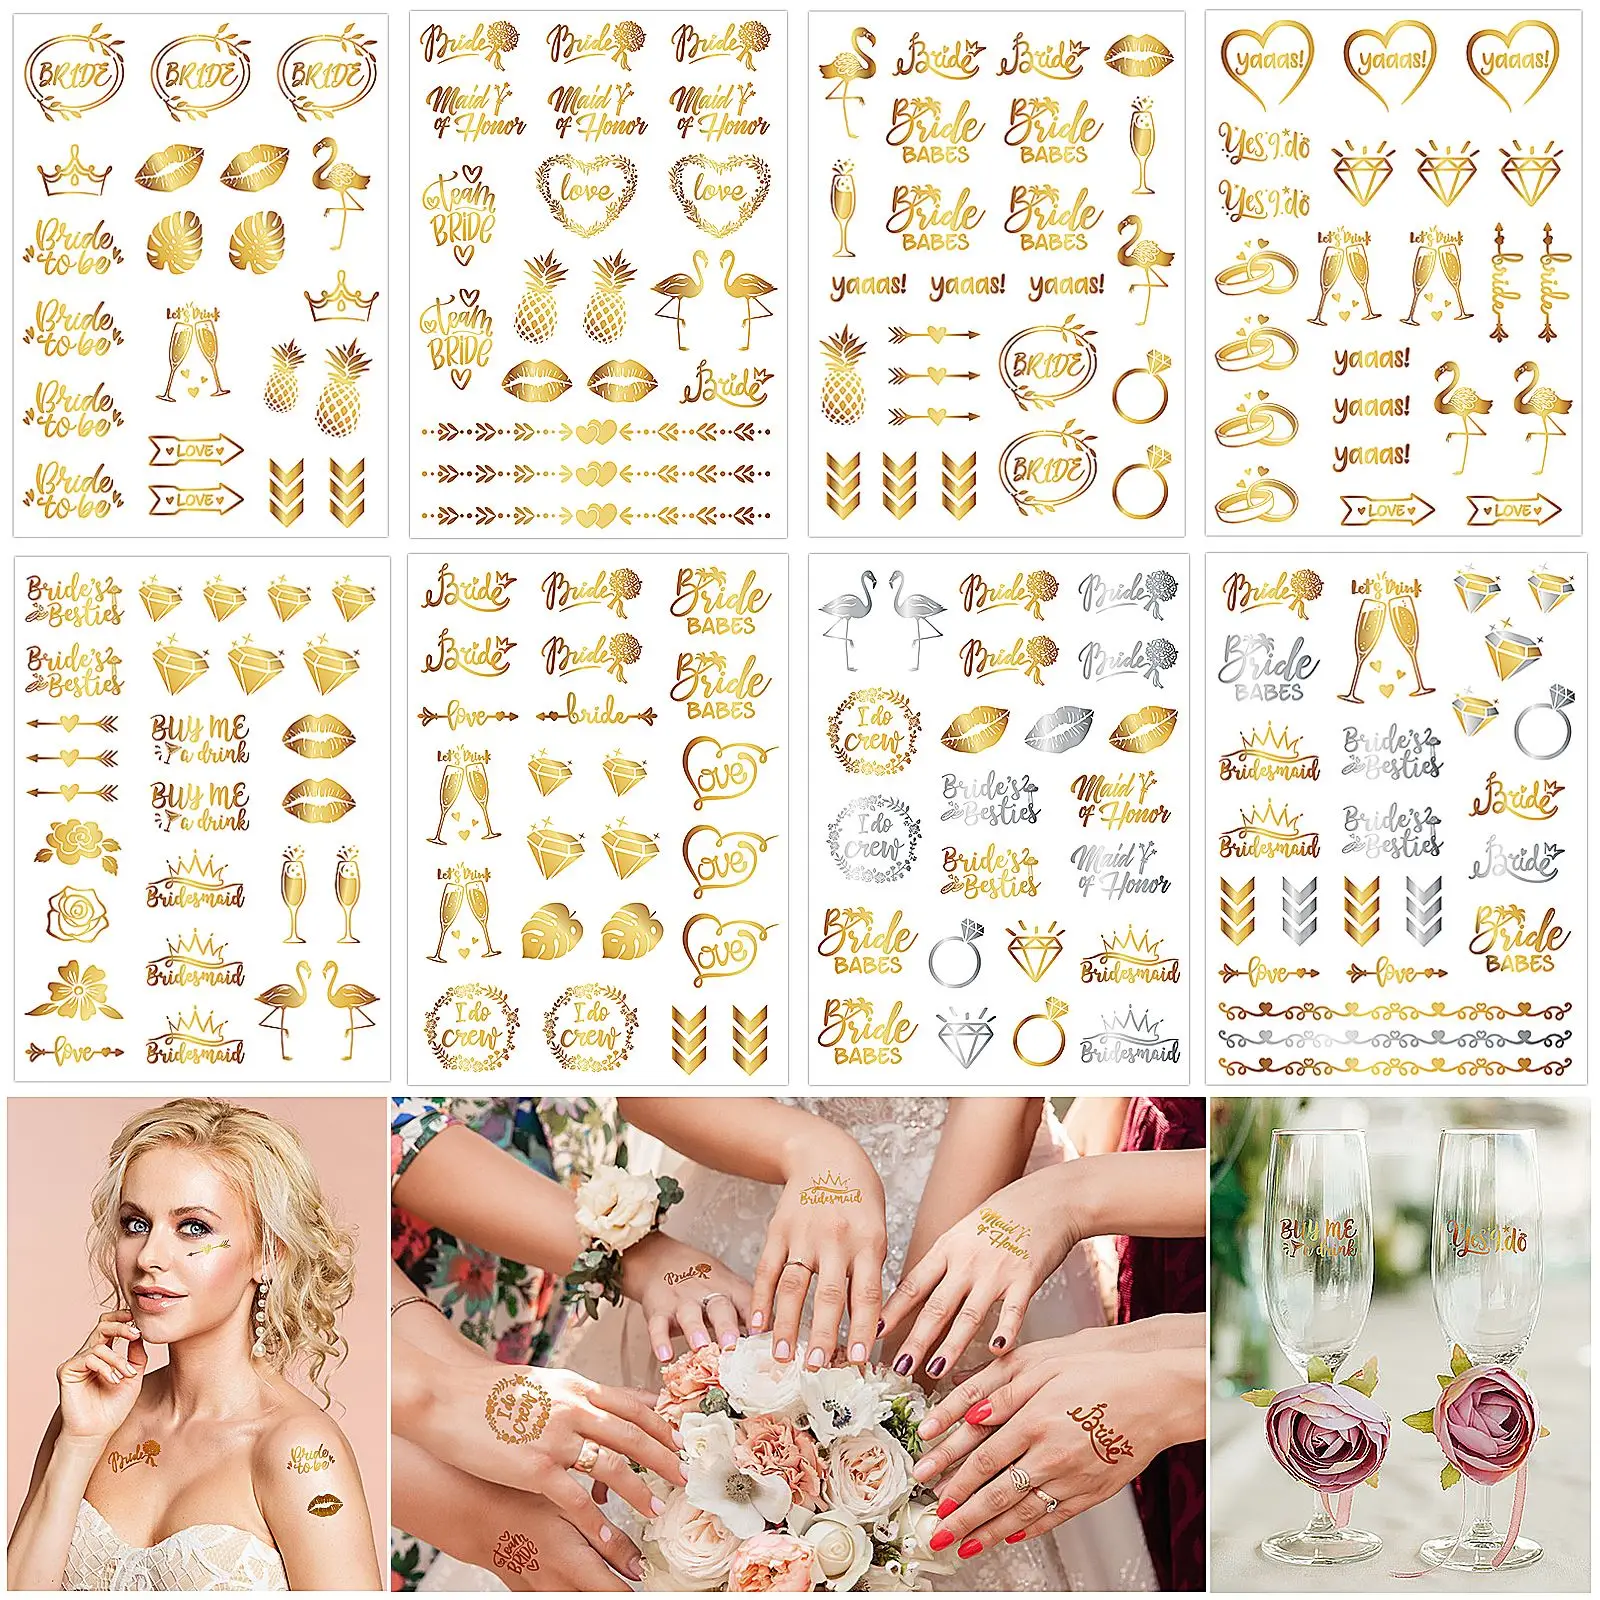 

8 Sheets Metallic Bachelorette Tattoos Bronzing Temporary Tattoos Body Stickers Bridal Party Favors Tattoos Charming Stickers